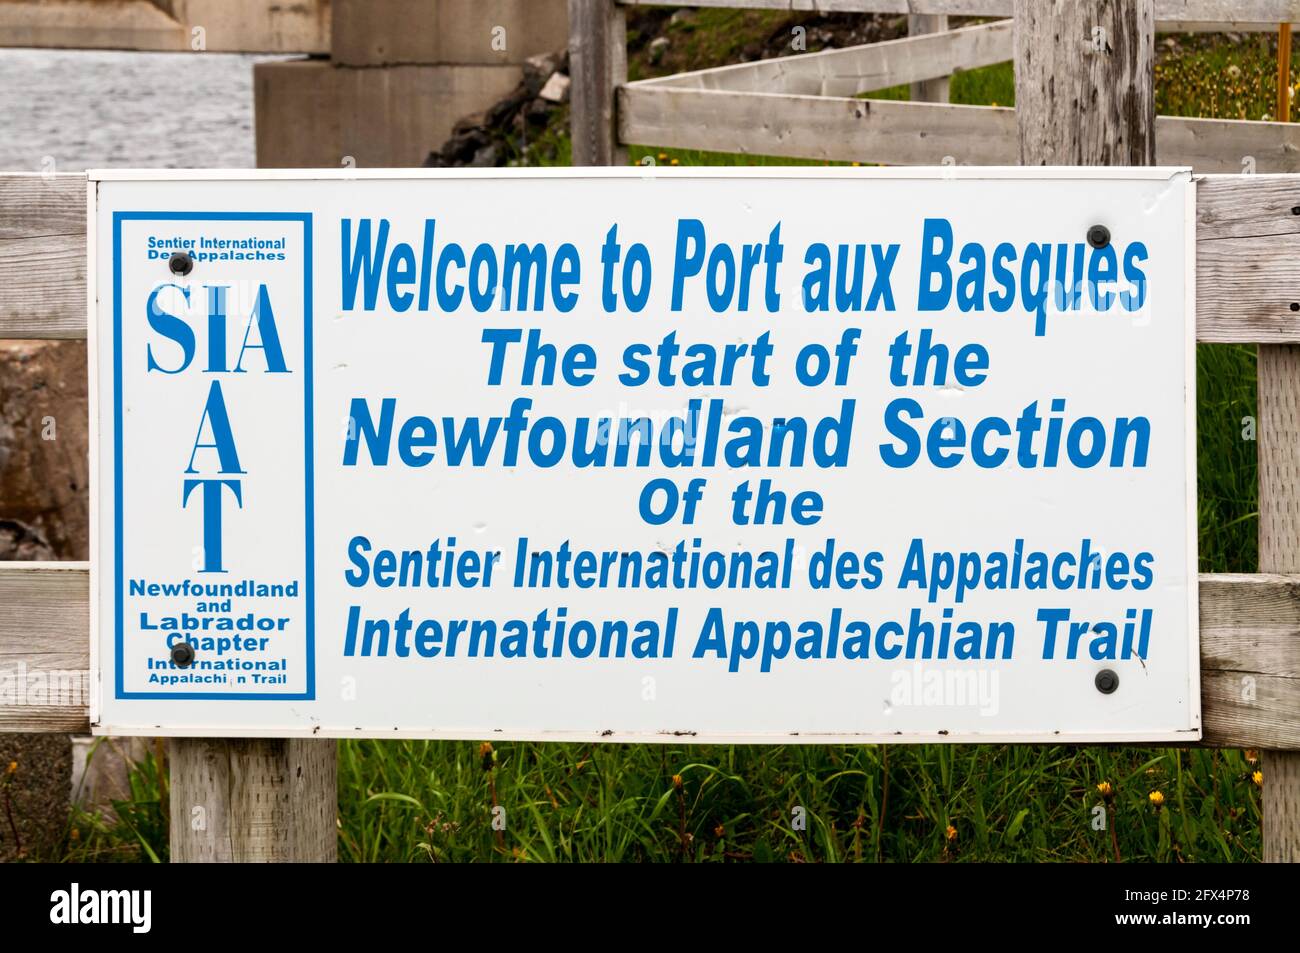 Sign at Port aux Basques, Newfoundland.  The start of the Newfoundland section of the International Appalachian Trail. Stock Photo